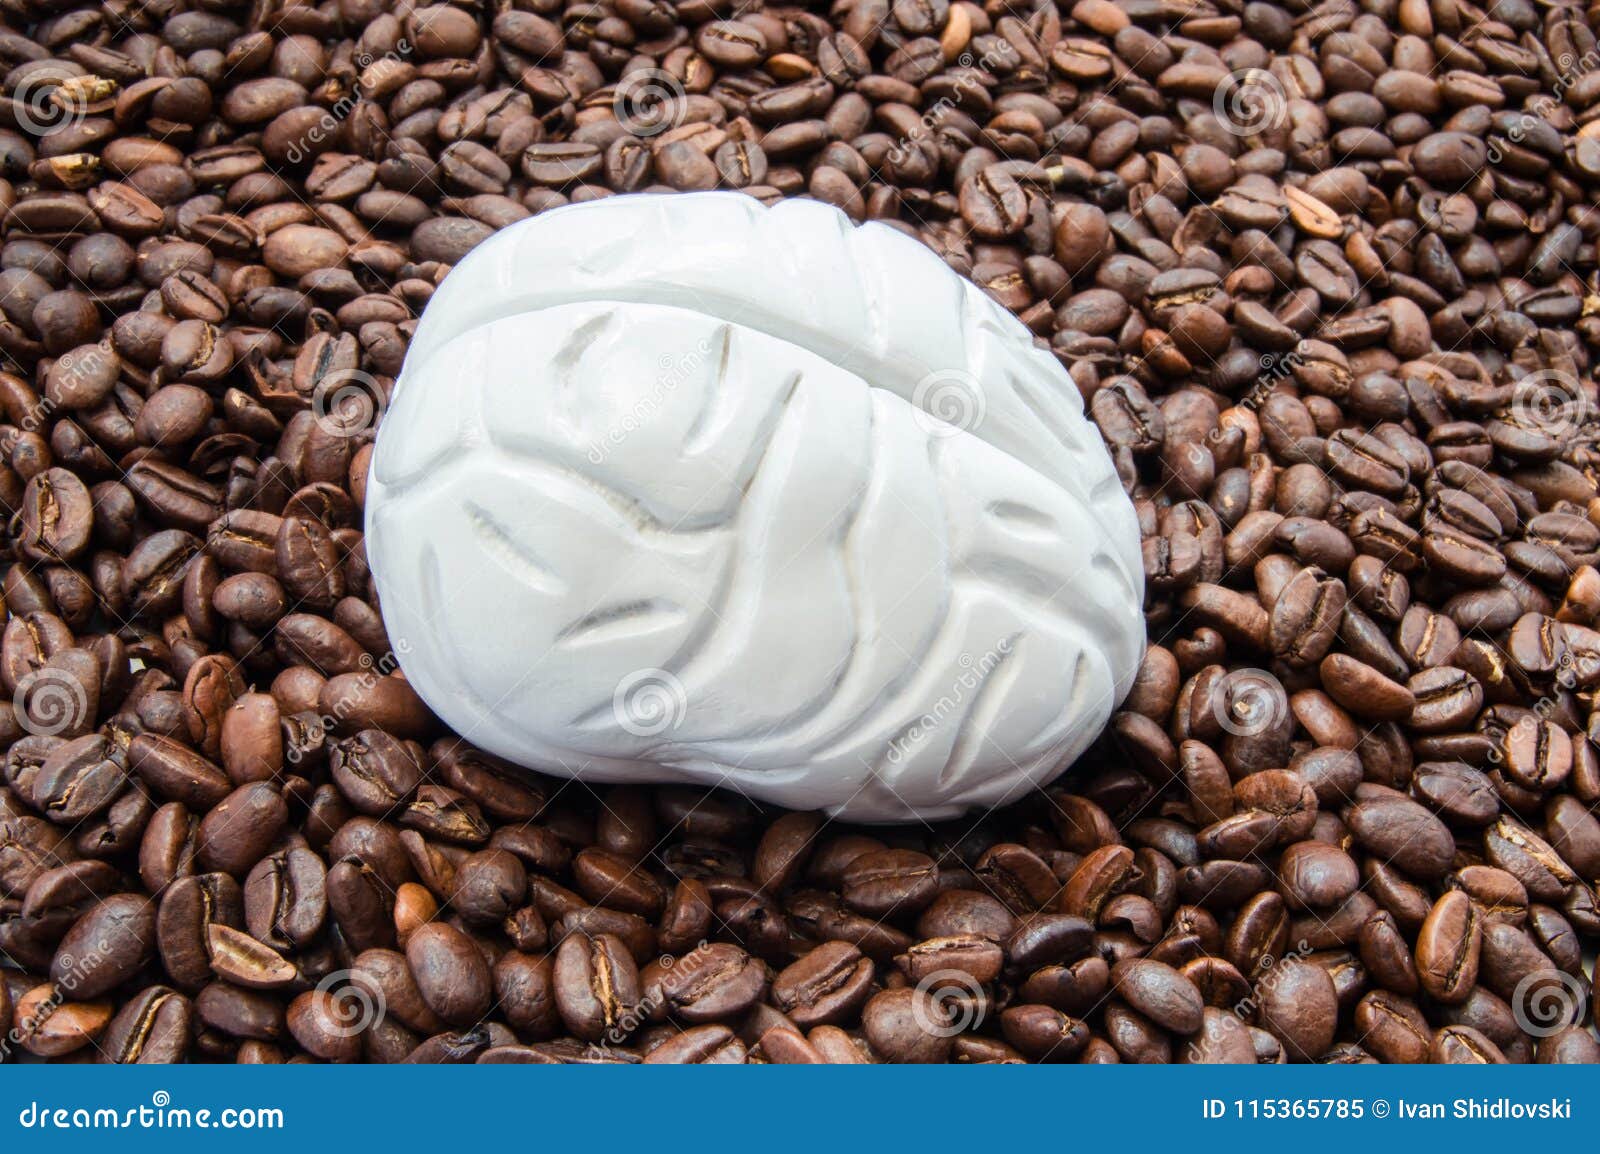 brain and coffee caffeine. brain model is among coffee beans. influence of coffee on the brain, nerve cells neurons, their fun